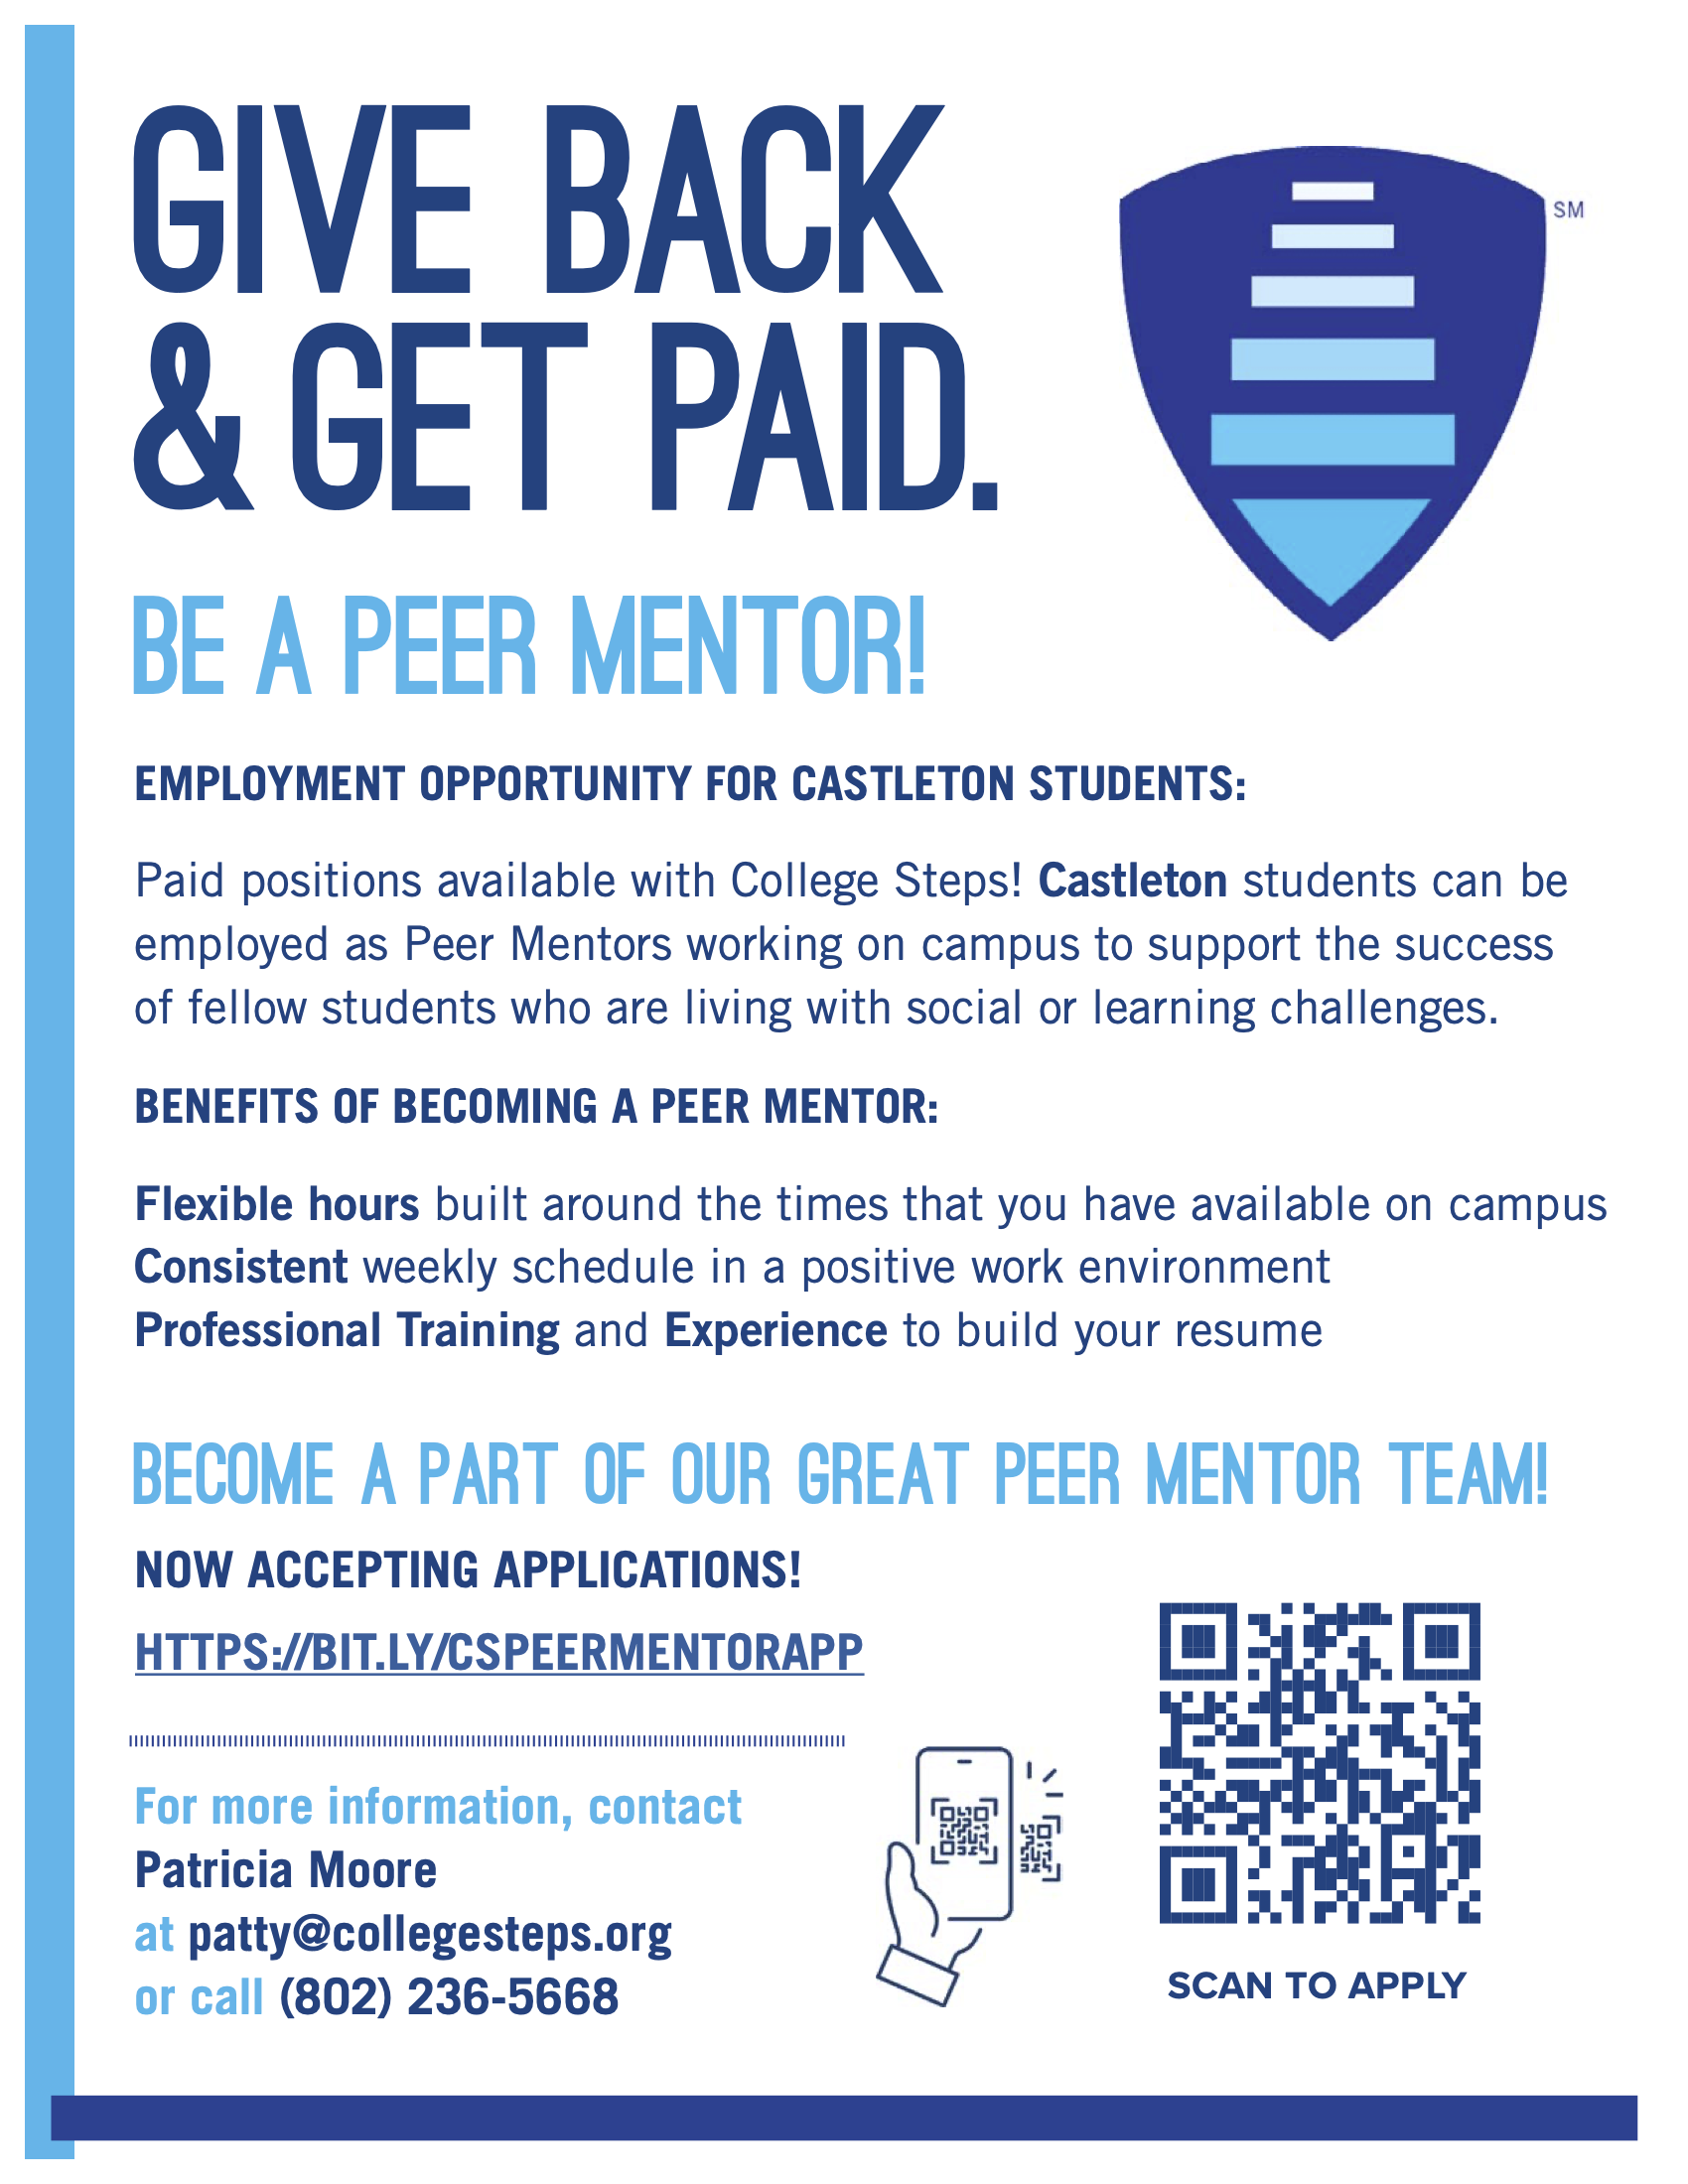 APPLY TODAY!! College Steps peer mentors wanted!!!